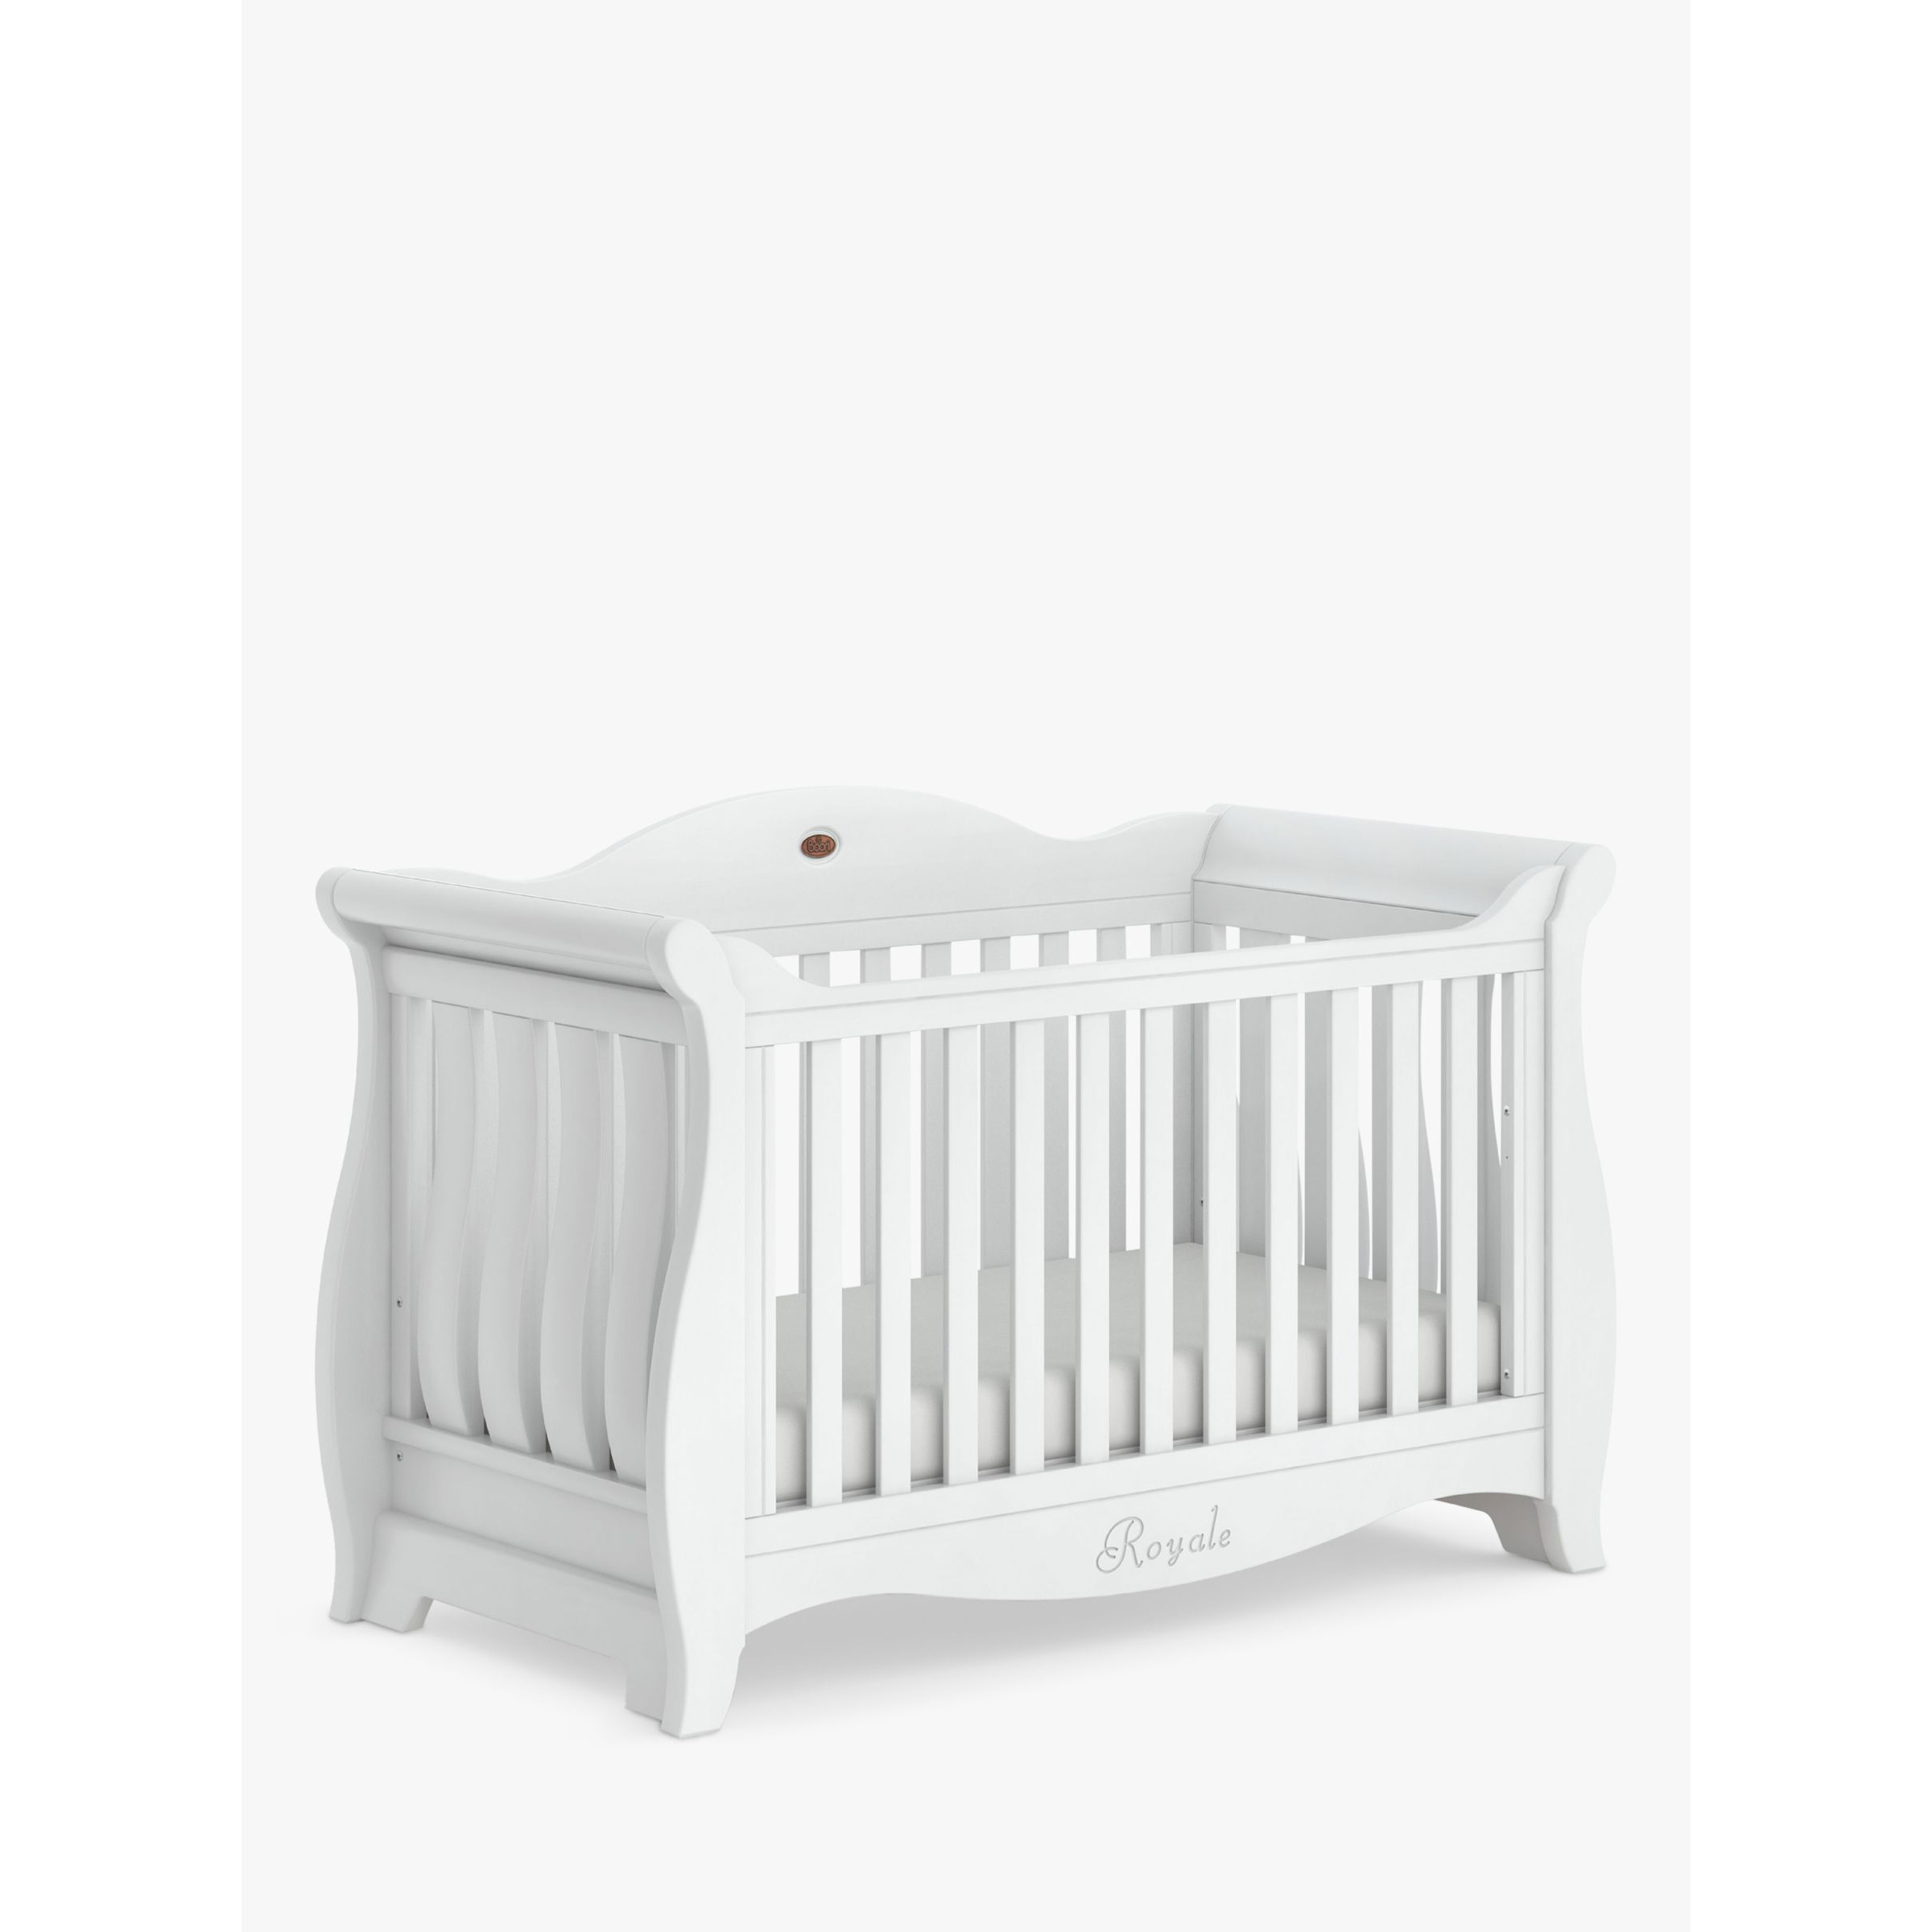 Boori Sleigh Royale Cotbed, White - image 1